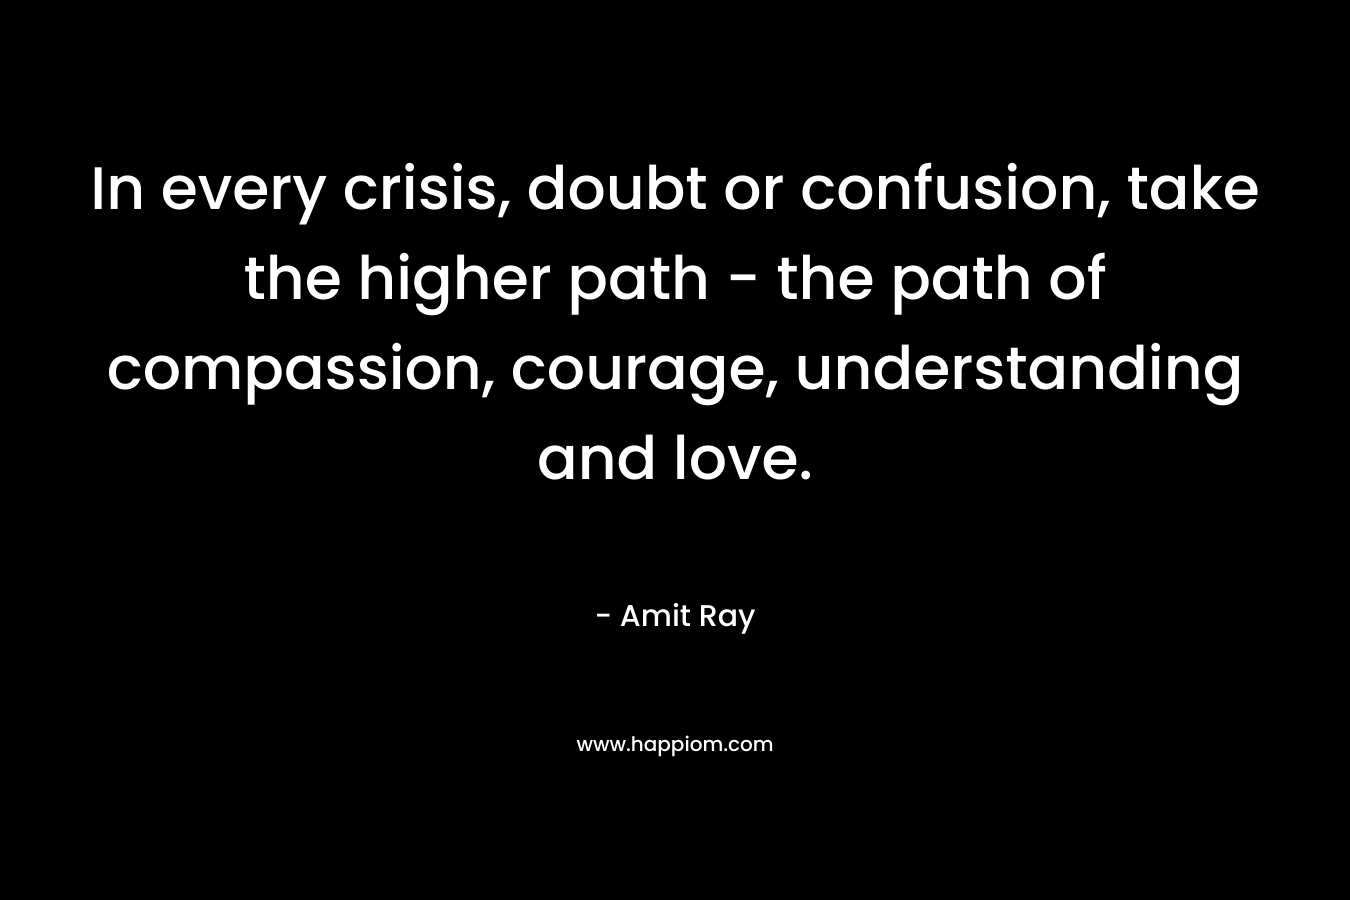 In every crisis, doubt or confusion, take the higher path - the path of compassion, courage, understanding and love.